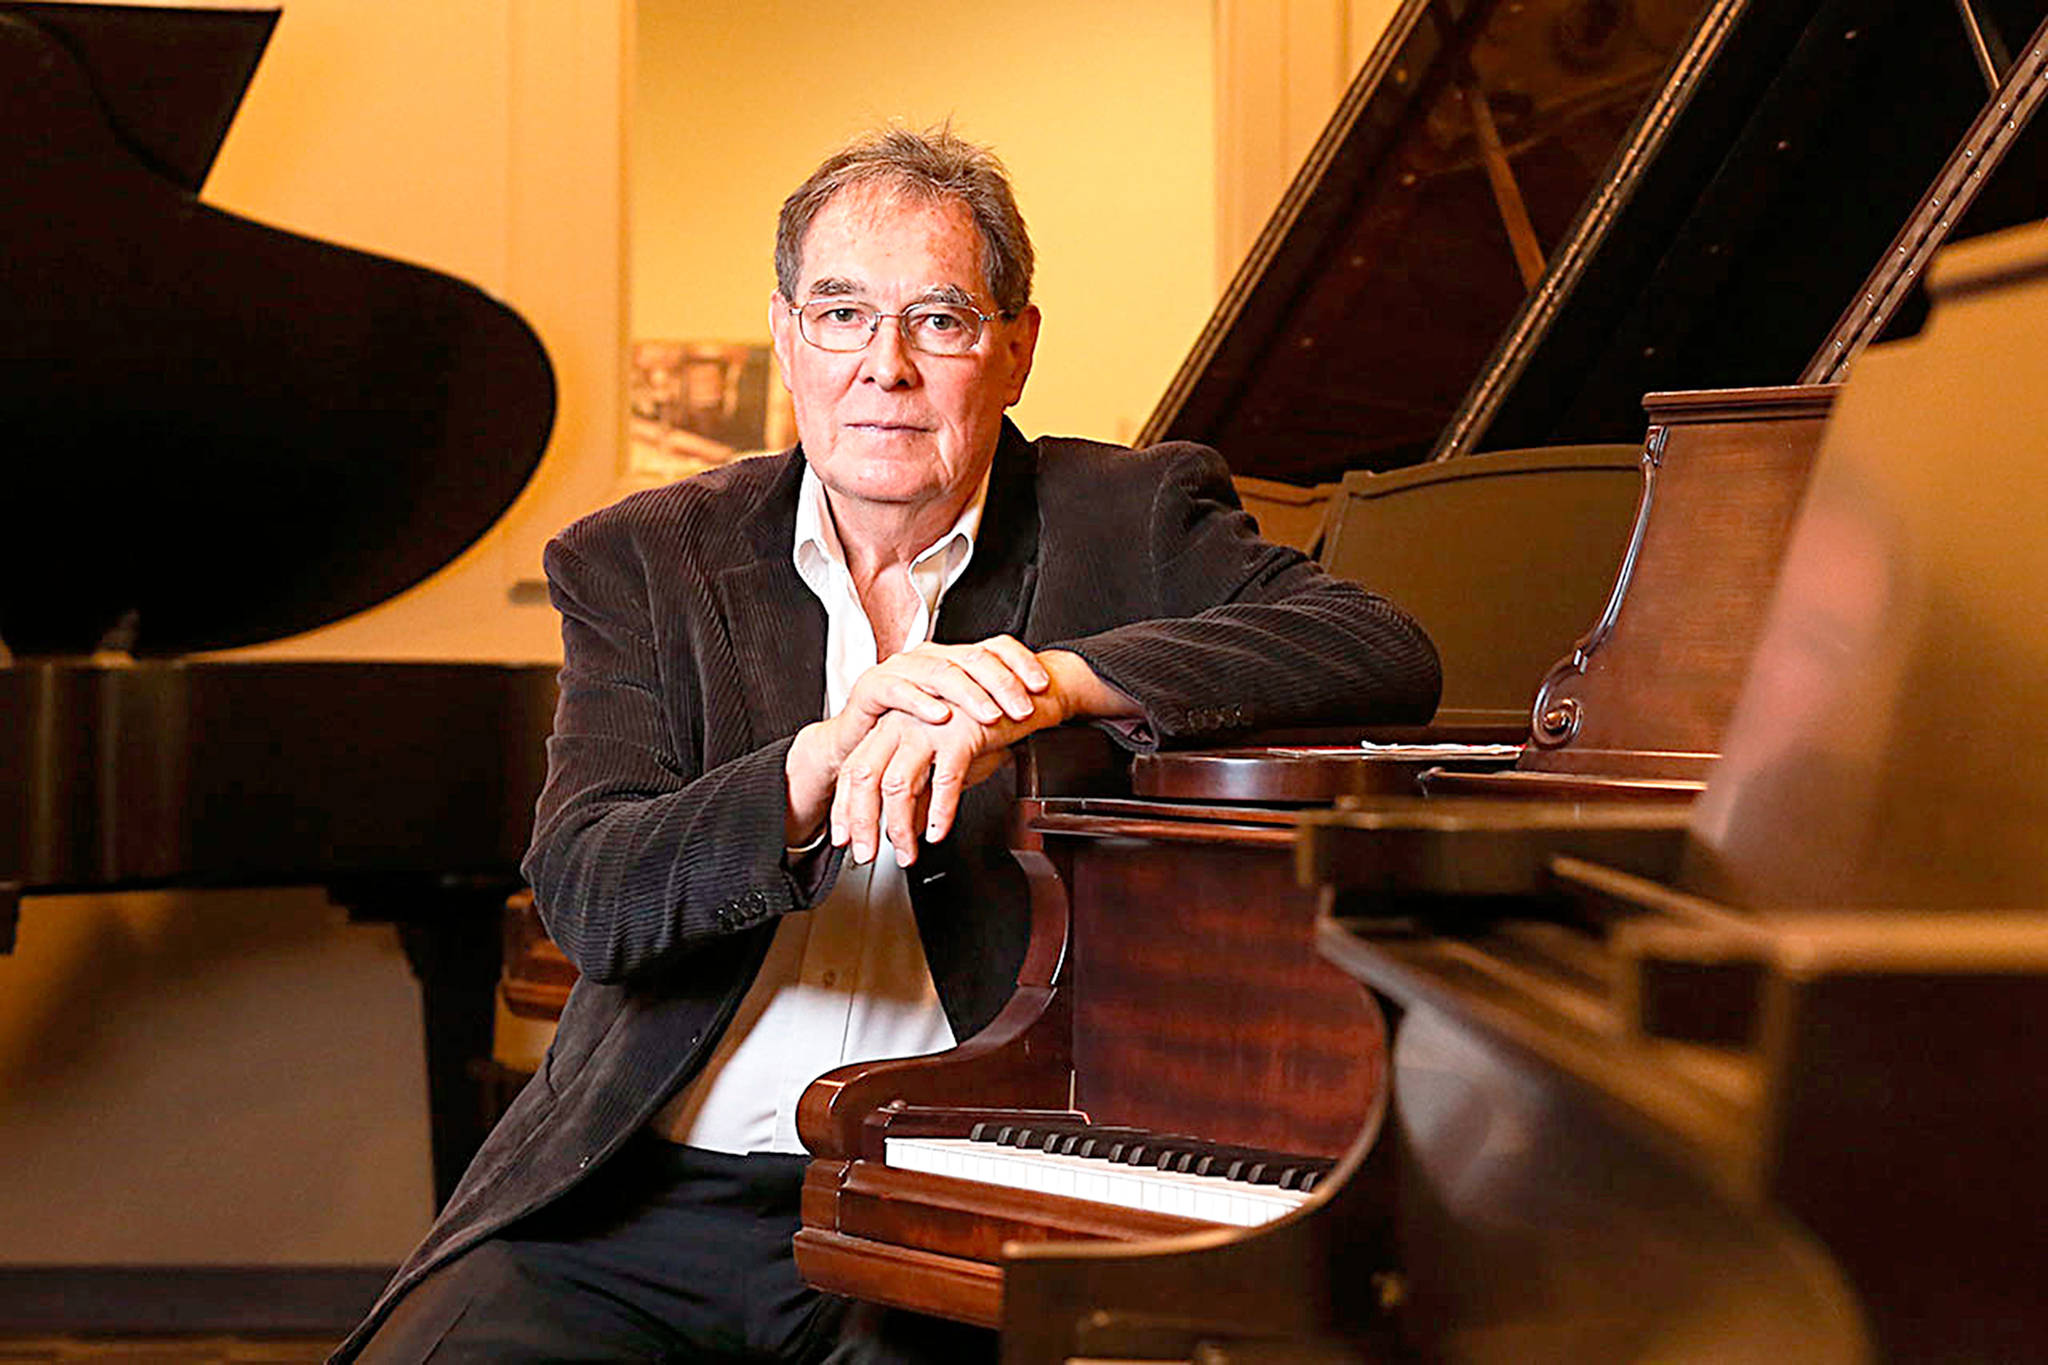 Kevin Clark / The Herald — Lloyd Boyd has become Whidbey’s Piano Man following the death of his brother, Ronald Boyd, who stored his collection of Steinways and other rebuilt grand pianos in Greenbank.